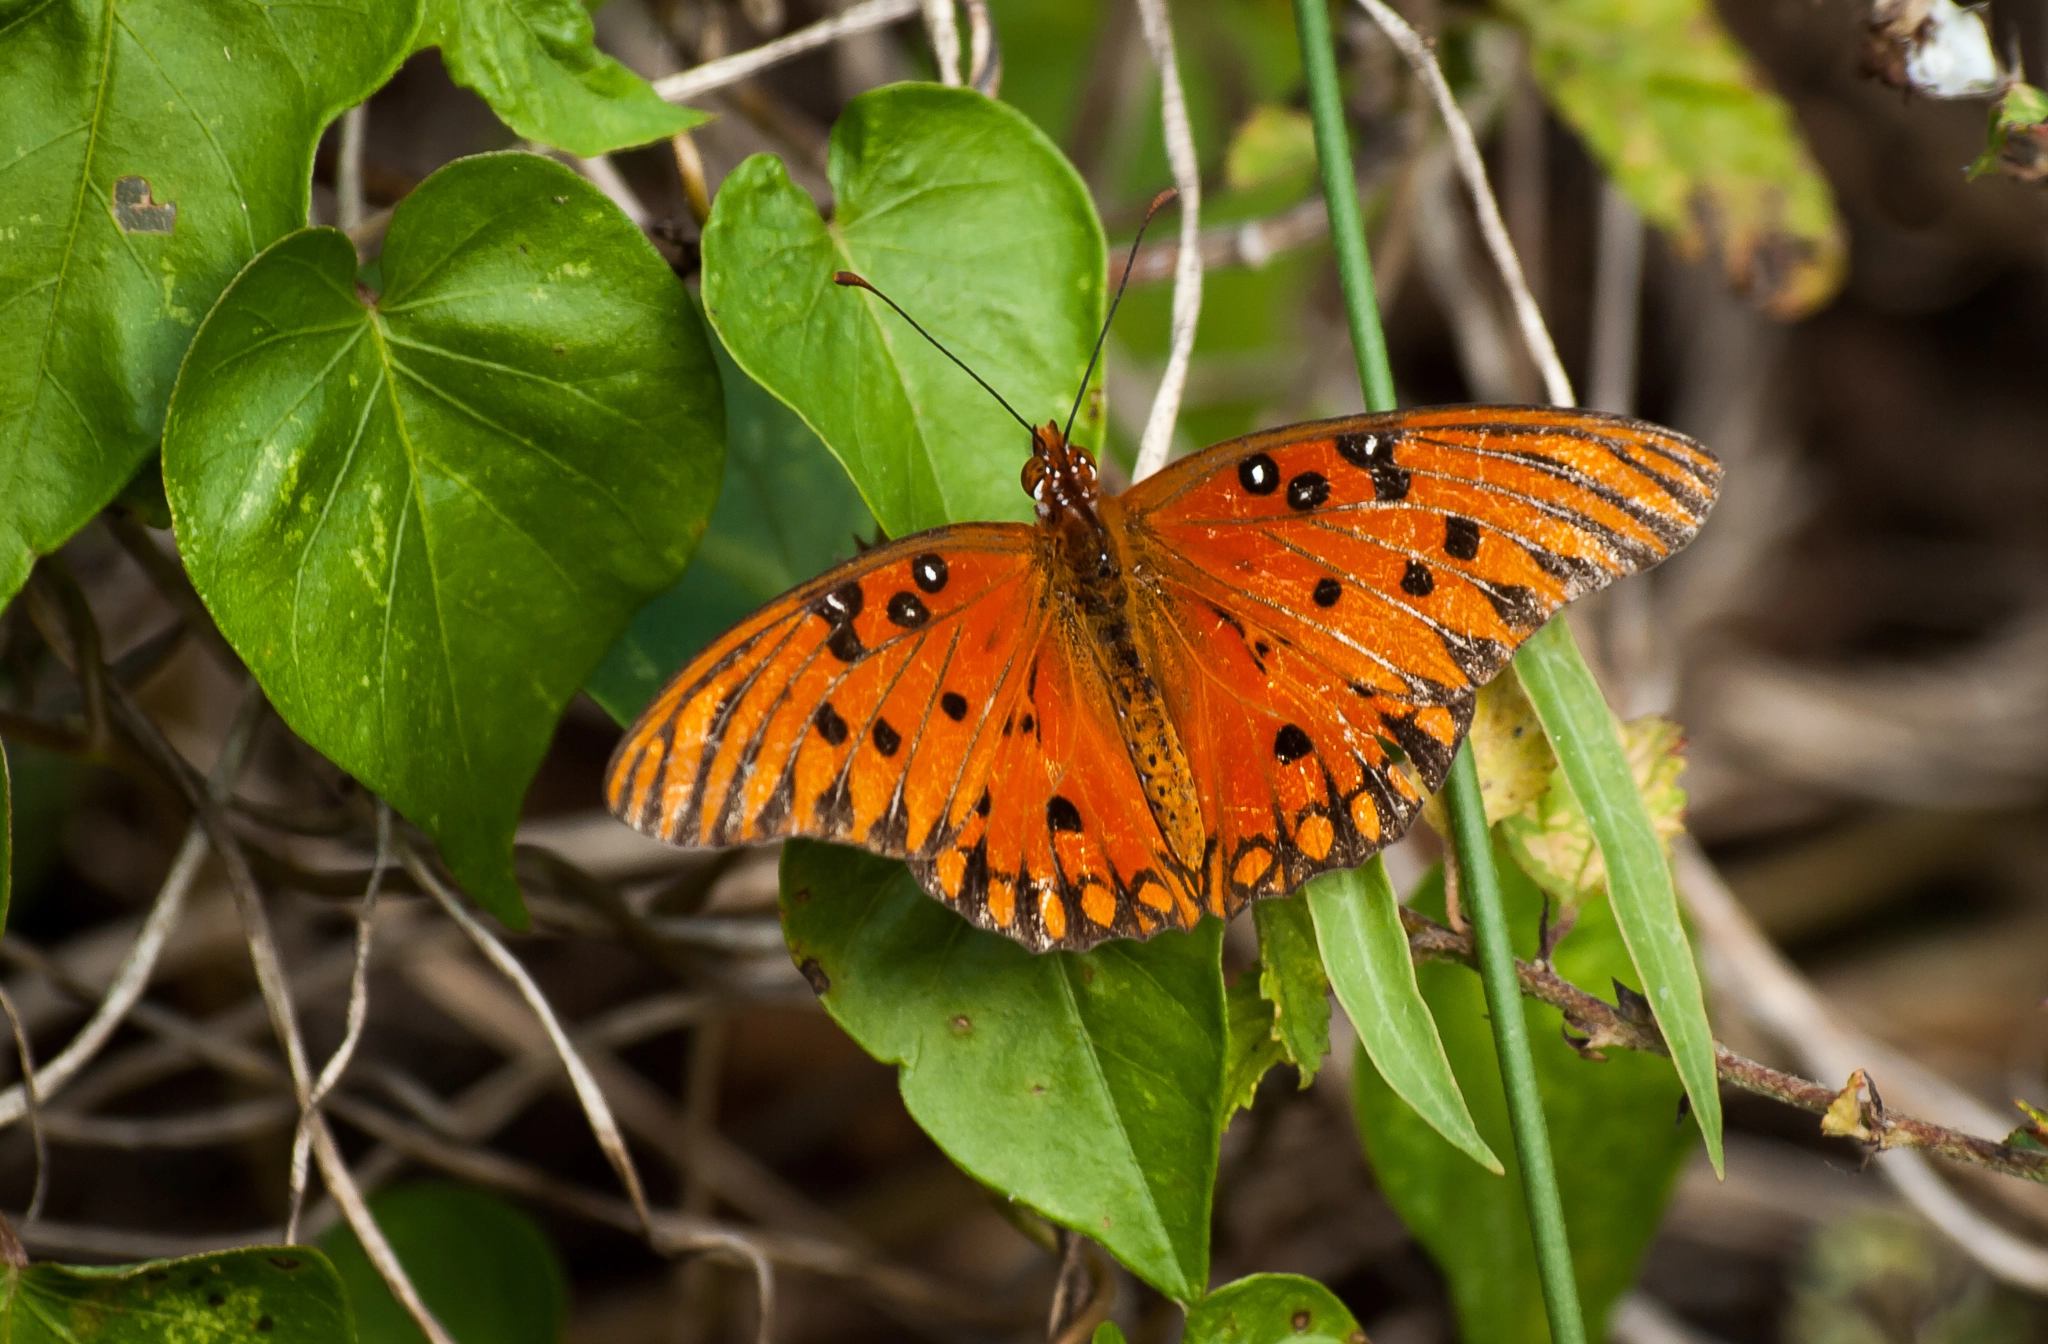 Olympus E-620 (EVOLT E-620) sample photo. Gulf fritillary or passion butterfly (agraulis vanillae) photography